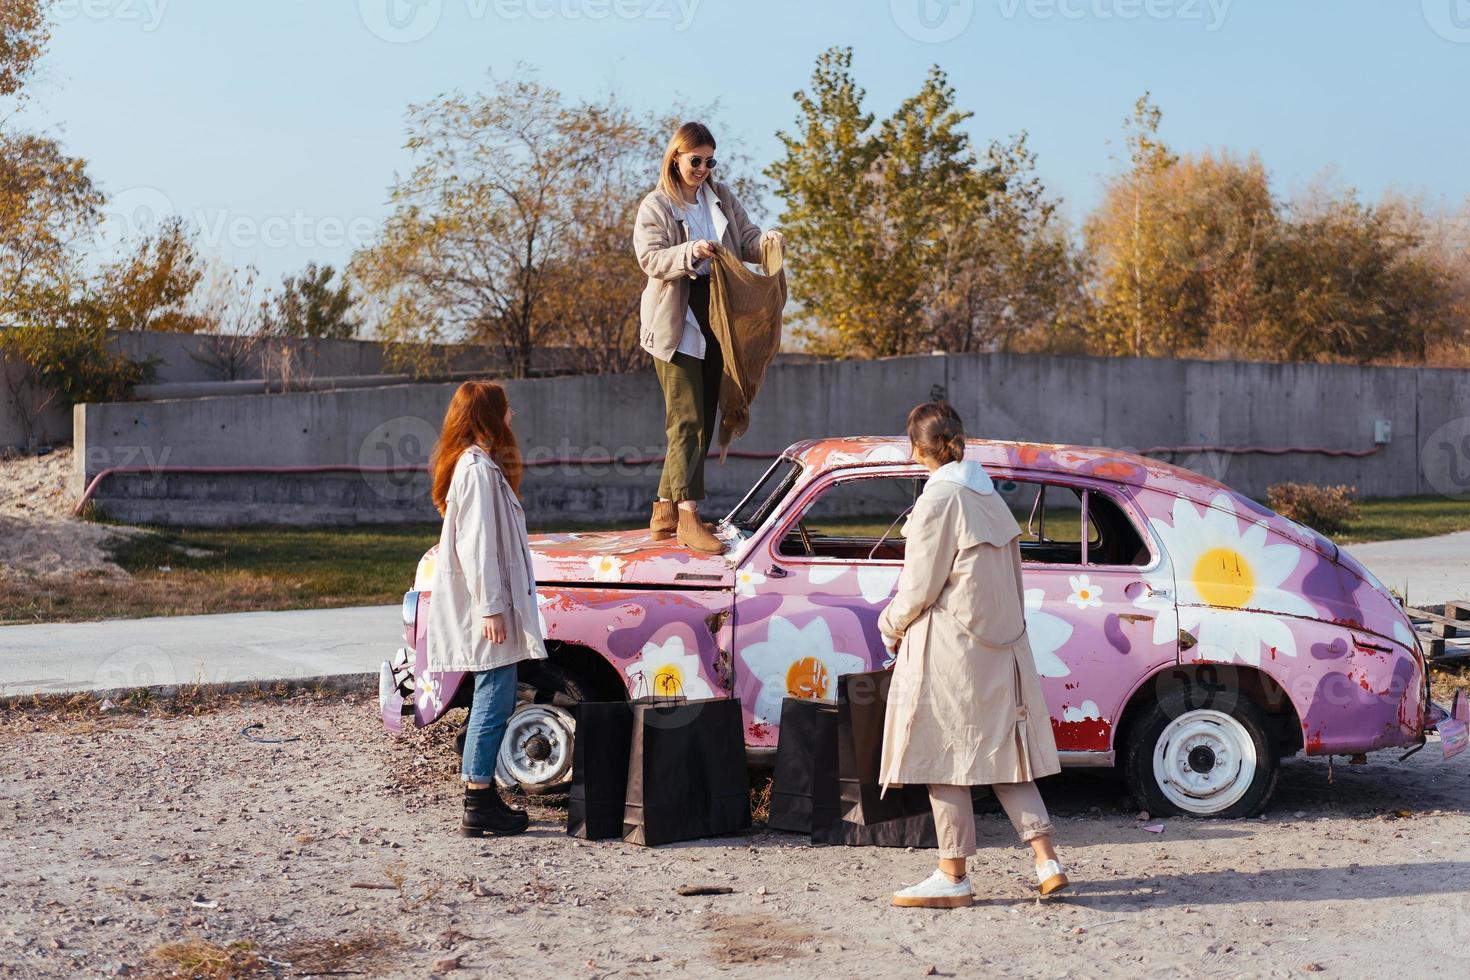 Young women posing near an old decorated car photo